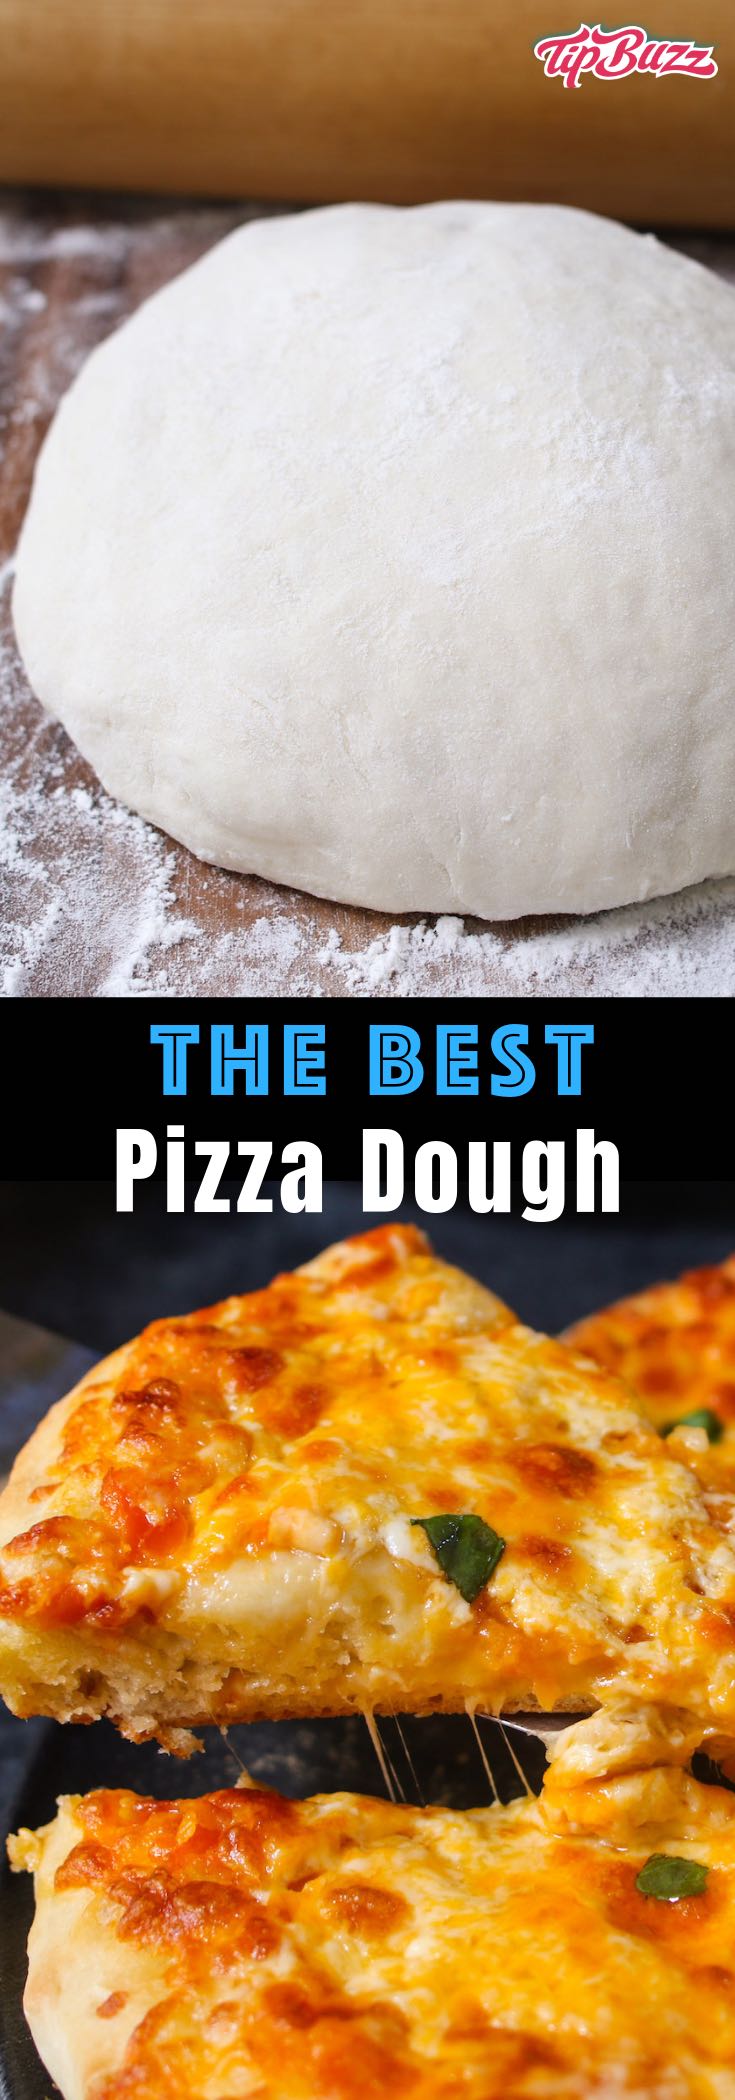 This Easy Pizza Dough Recipe makes soft and fluffy pizza crust that’s beyond irresistible! It’s the best homemade pizza dough that has been passed down through generations. It takes 10 minutes to prepare and made by hand with 6 simple ingredients! 